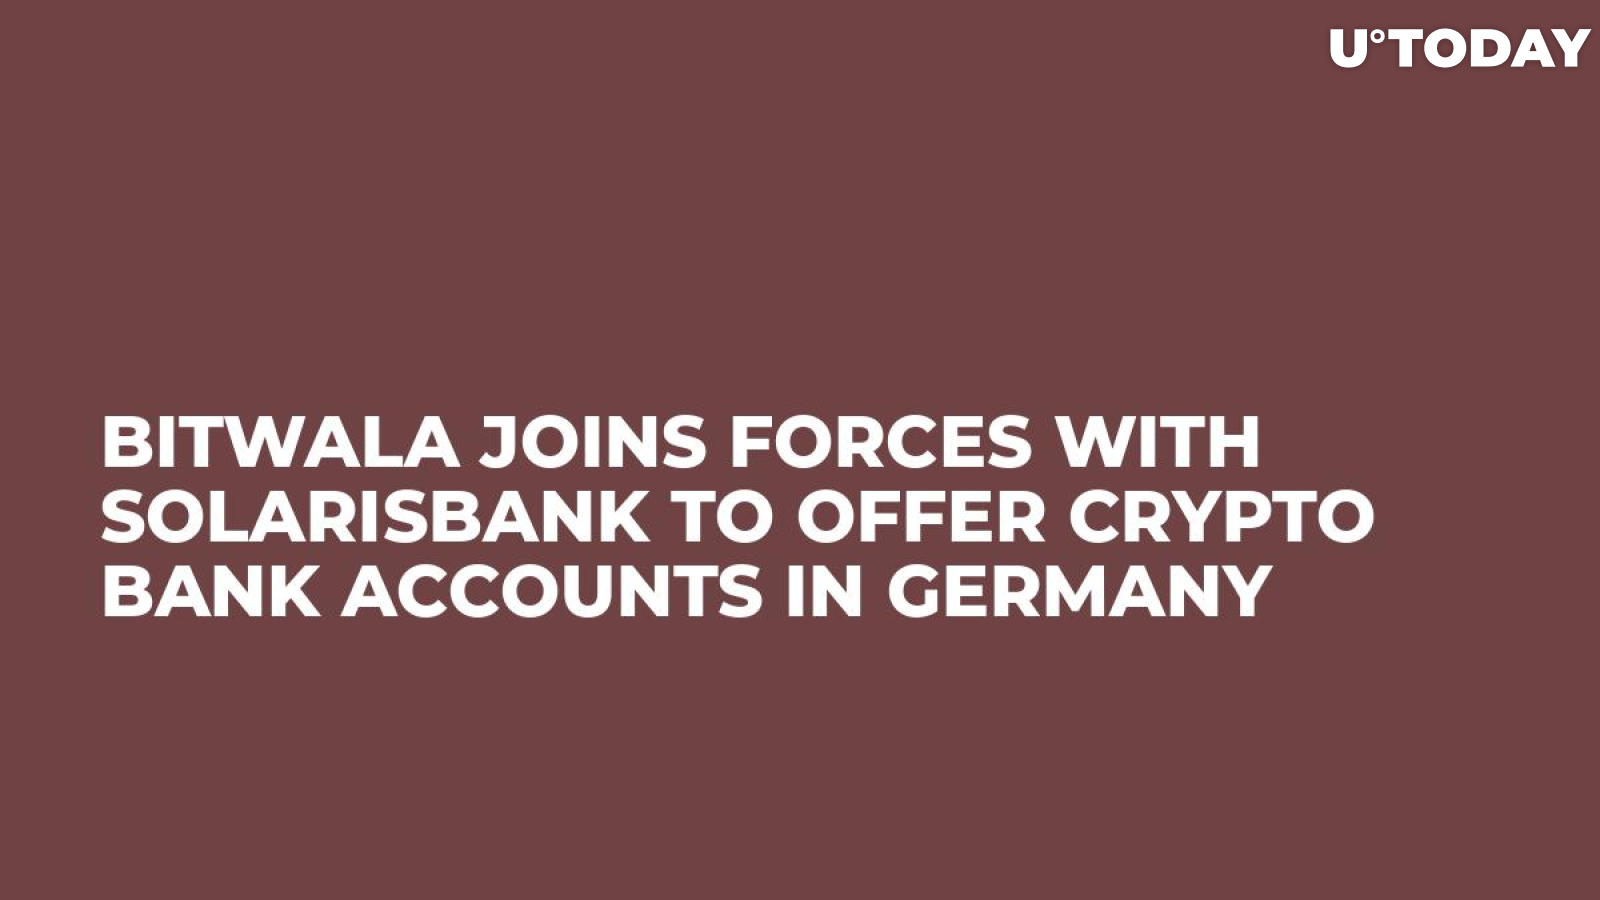 Bitwala Joins Forces with SolarisBank to Offer Crypto Bank Accounts in Germany